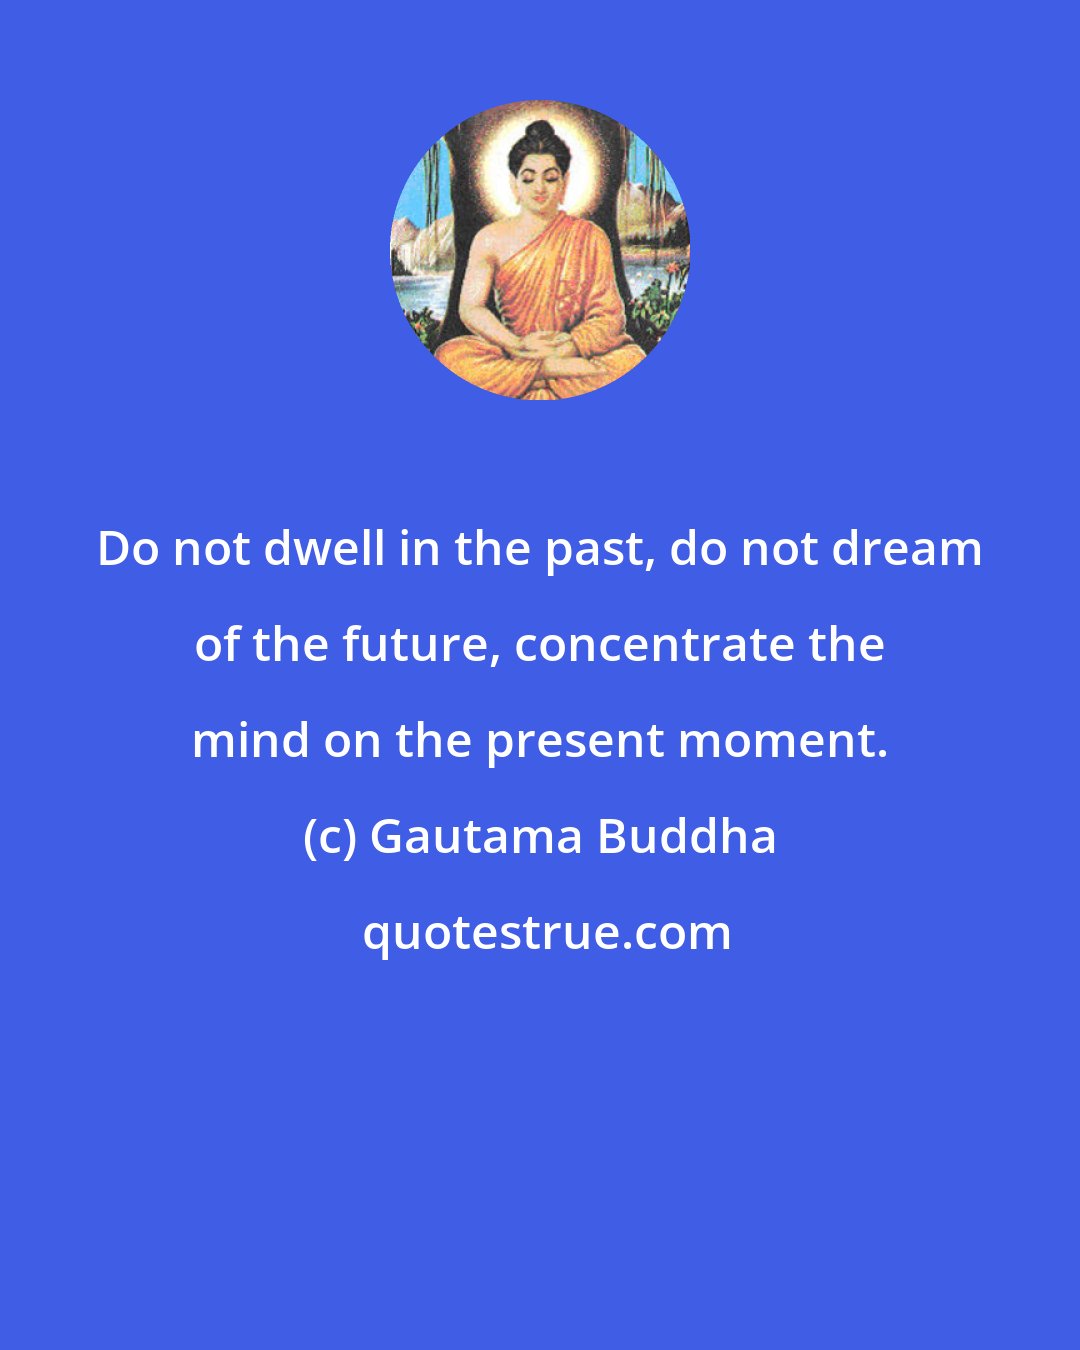 Gautama Buddha: Do not dwell in the past, do not dream of the future, concentrate the mind on the present moment.